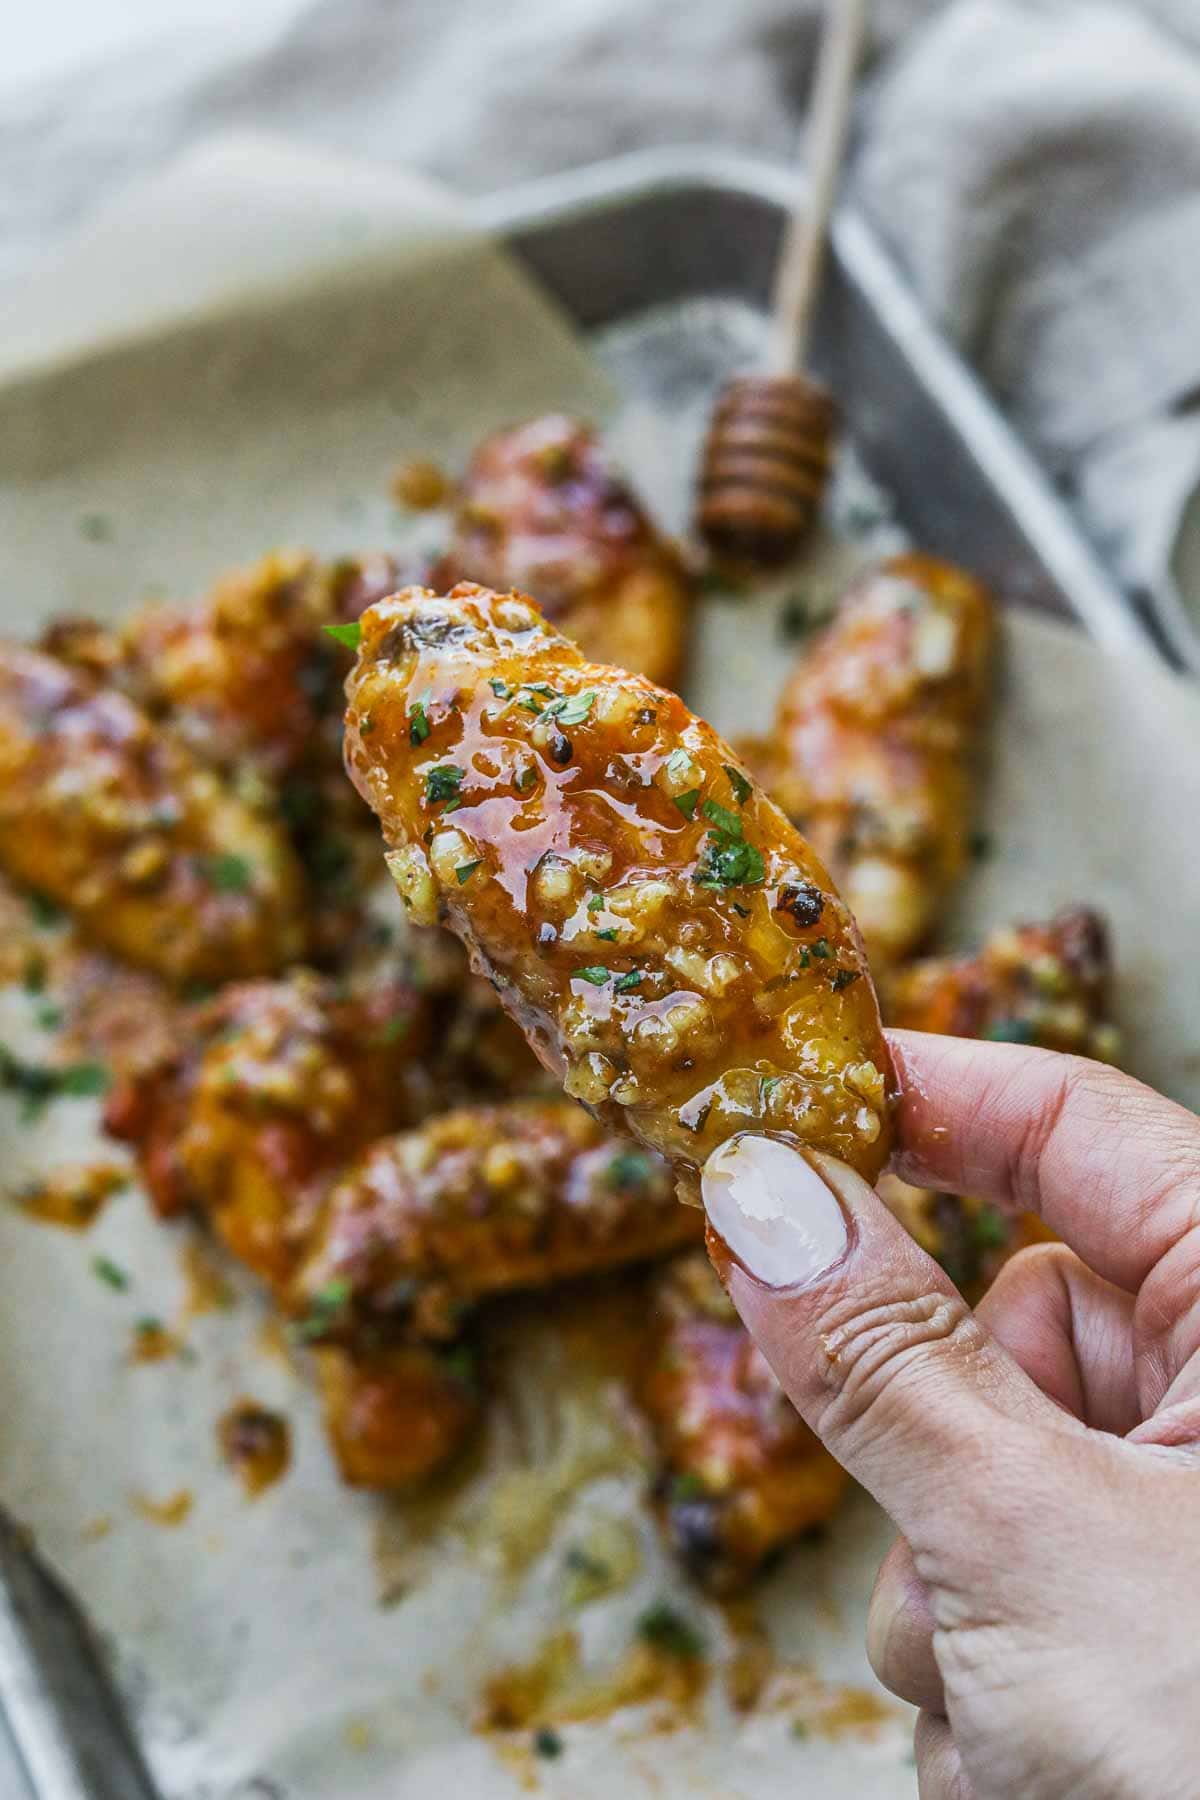 Hand holding a juicy honey garlic chicken wing covered in a homemade sauce.